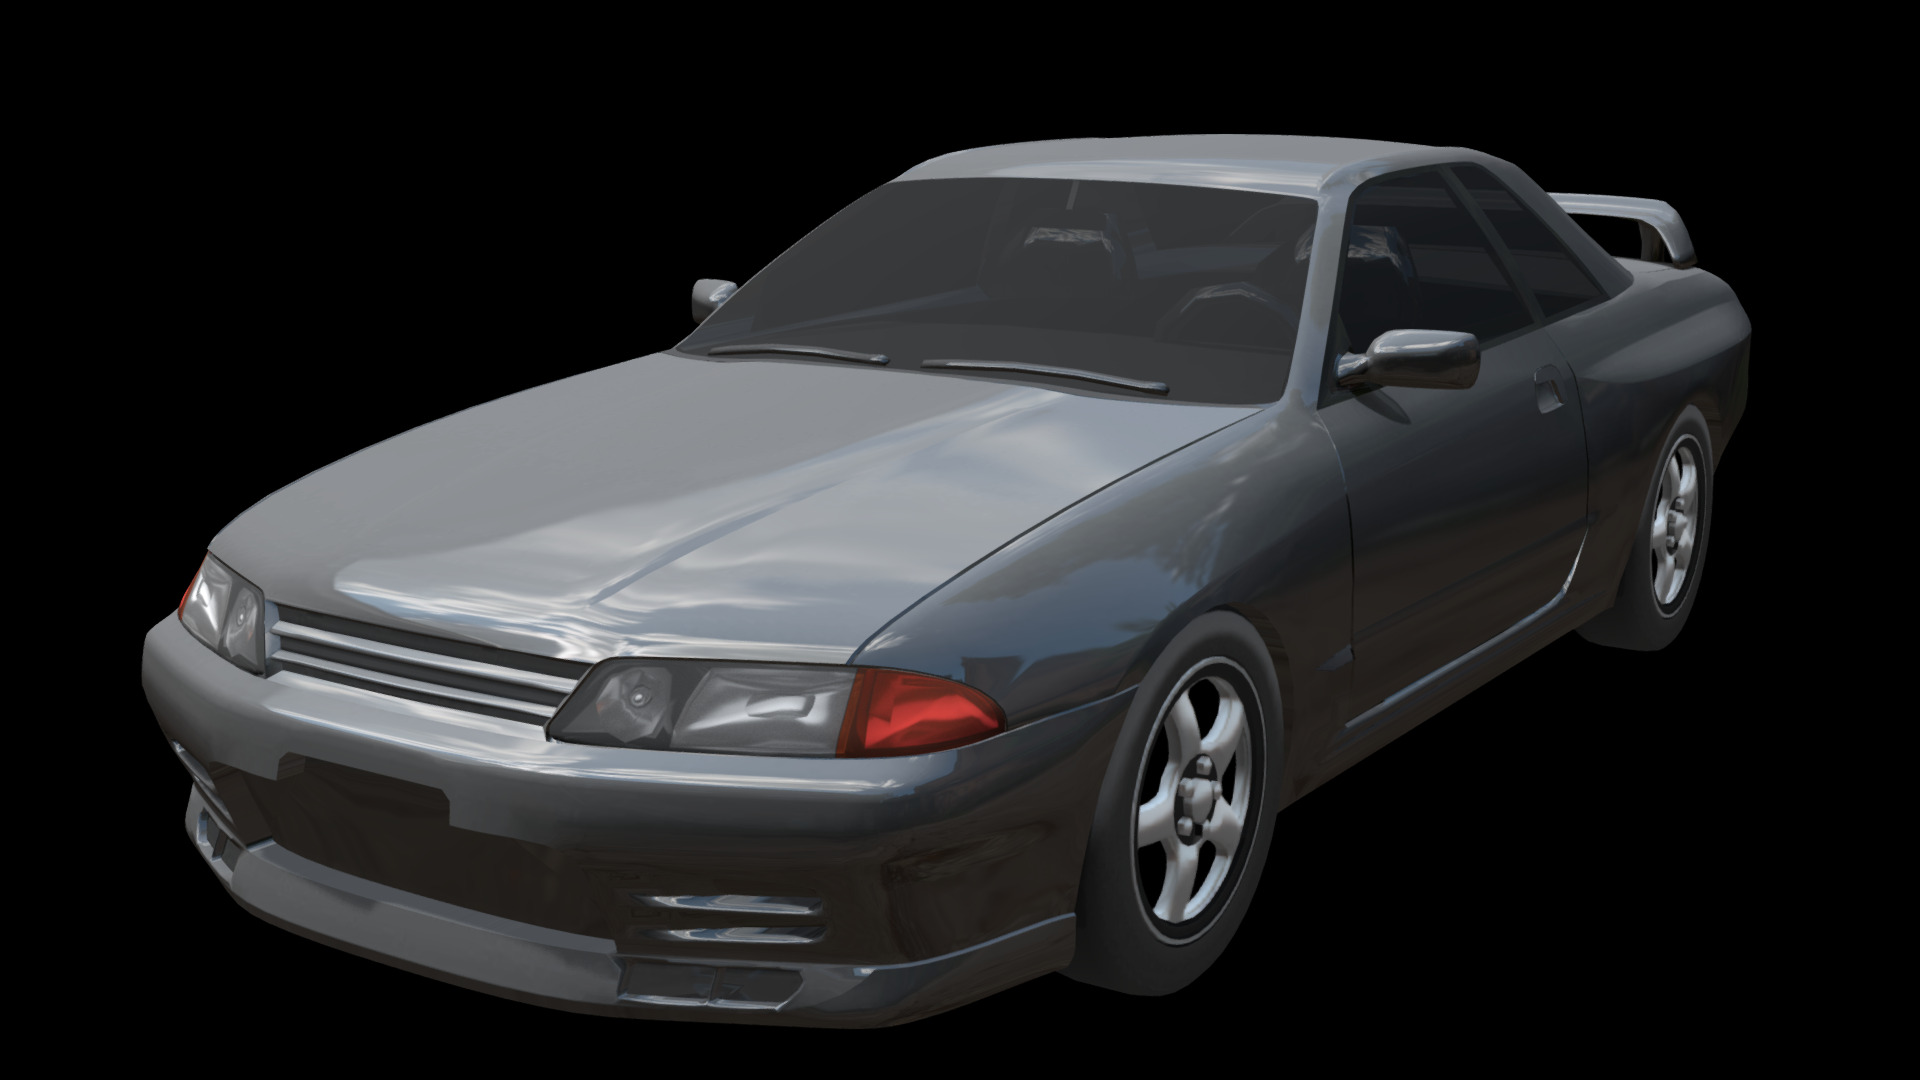 3D model Nissan Skyline R32 GTR - This is a 3D model of the Nissan Skyline R32 GTR. The 3D model is about a white car with a black background.